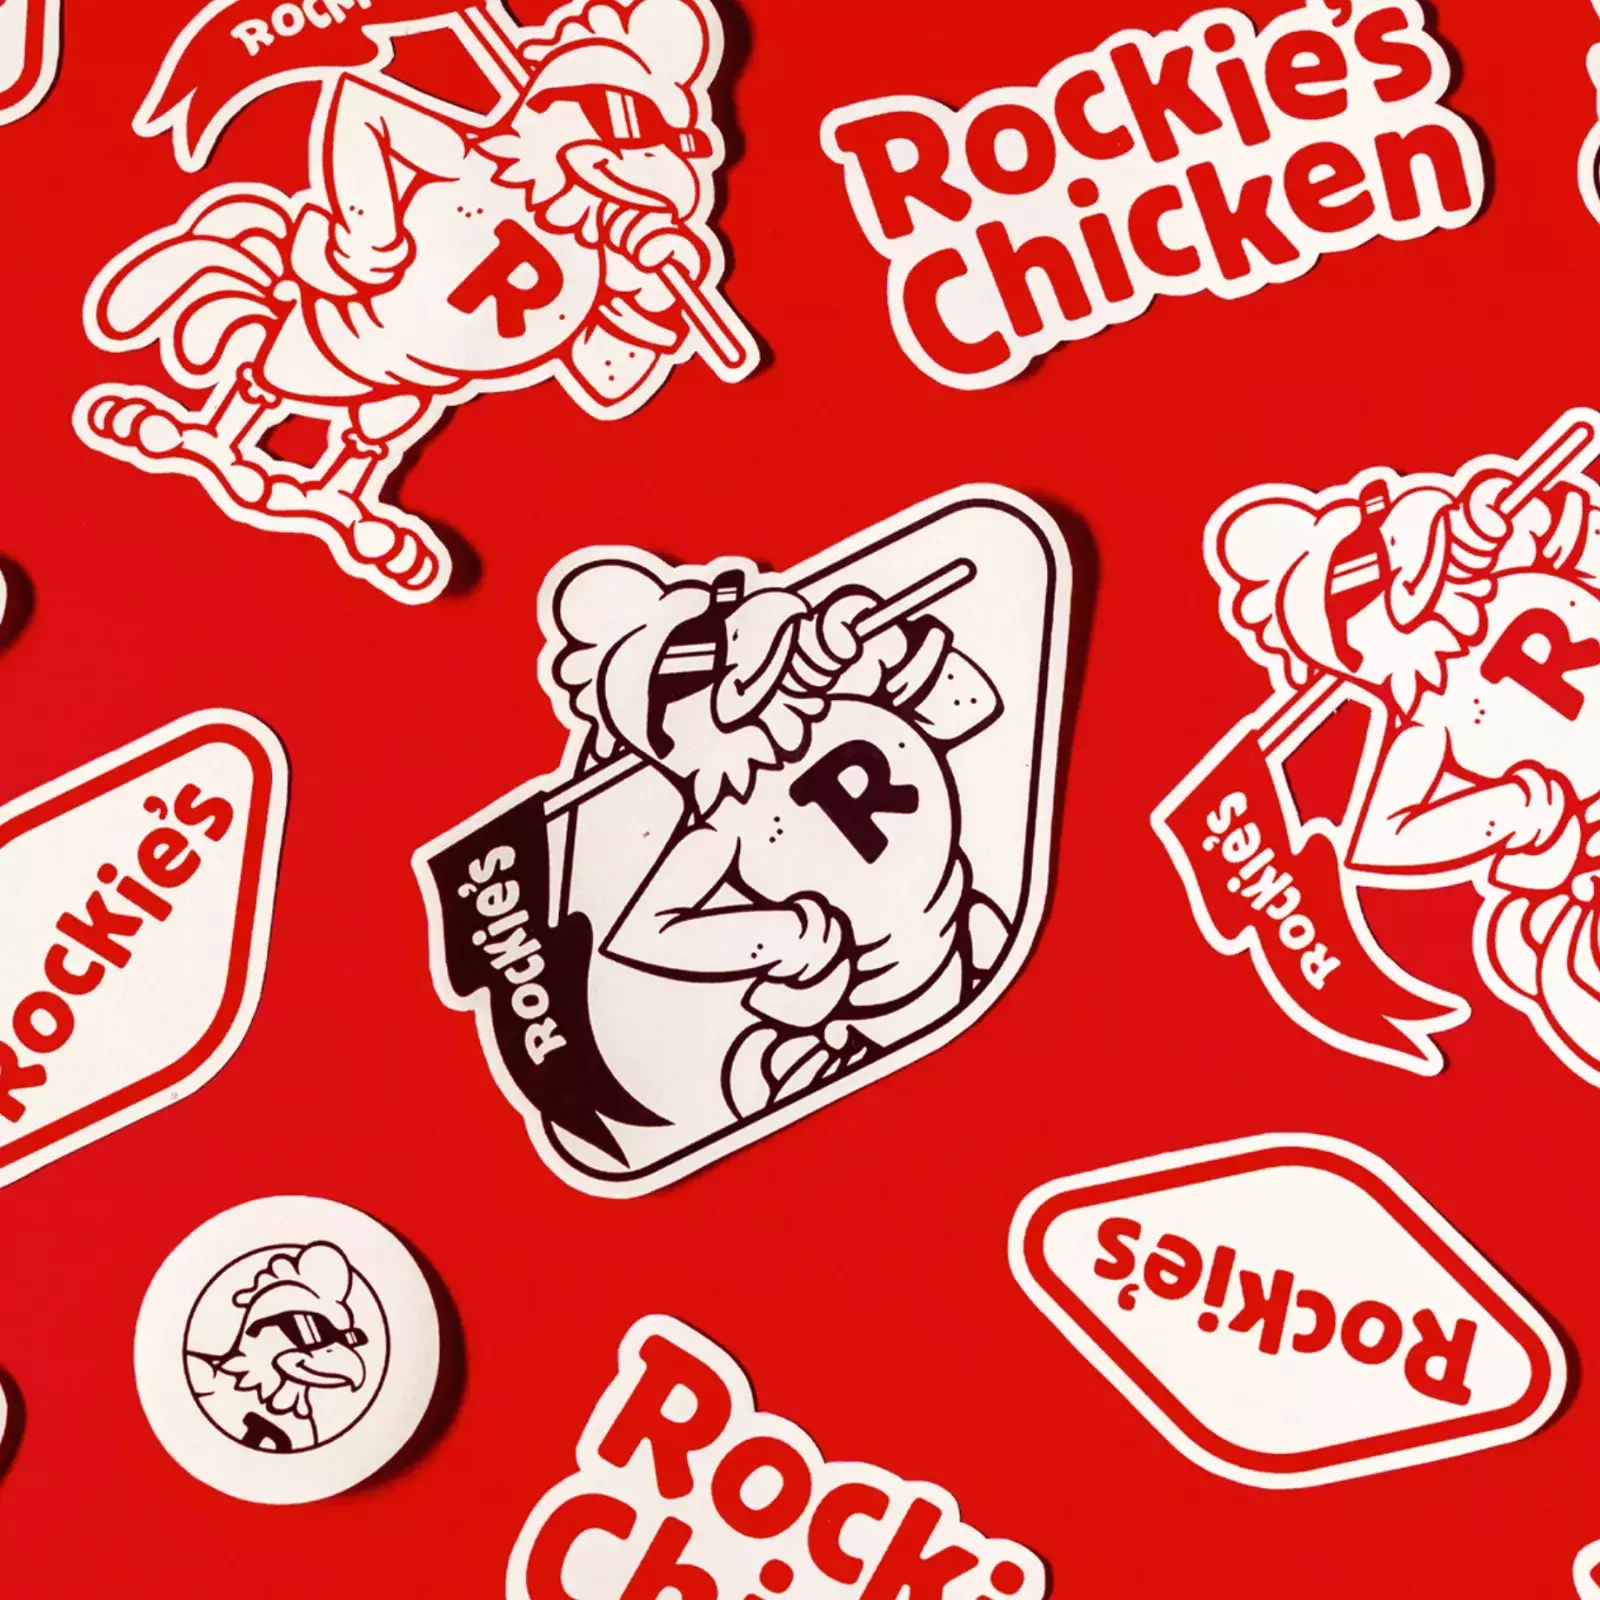 Rockie’s Chicken clean identity full of bright colors and fun graphics